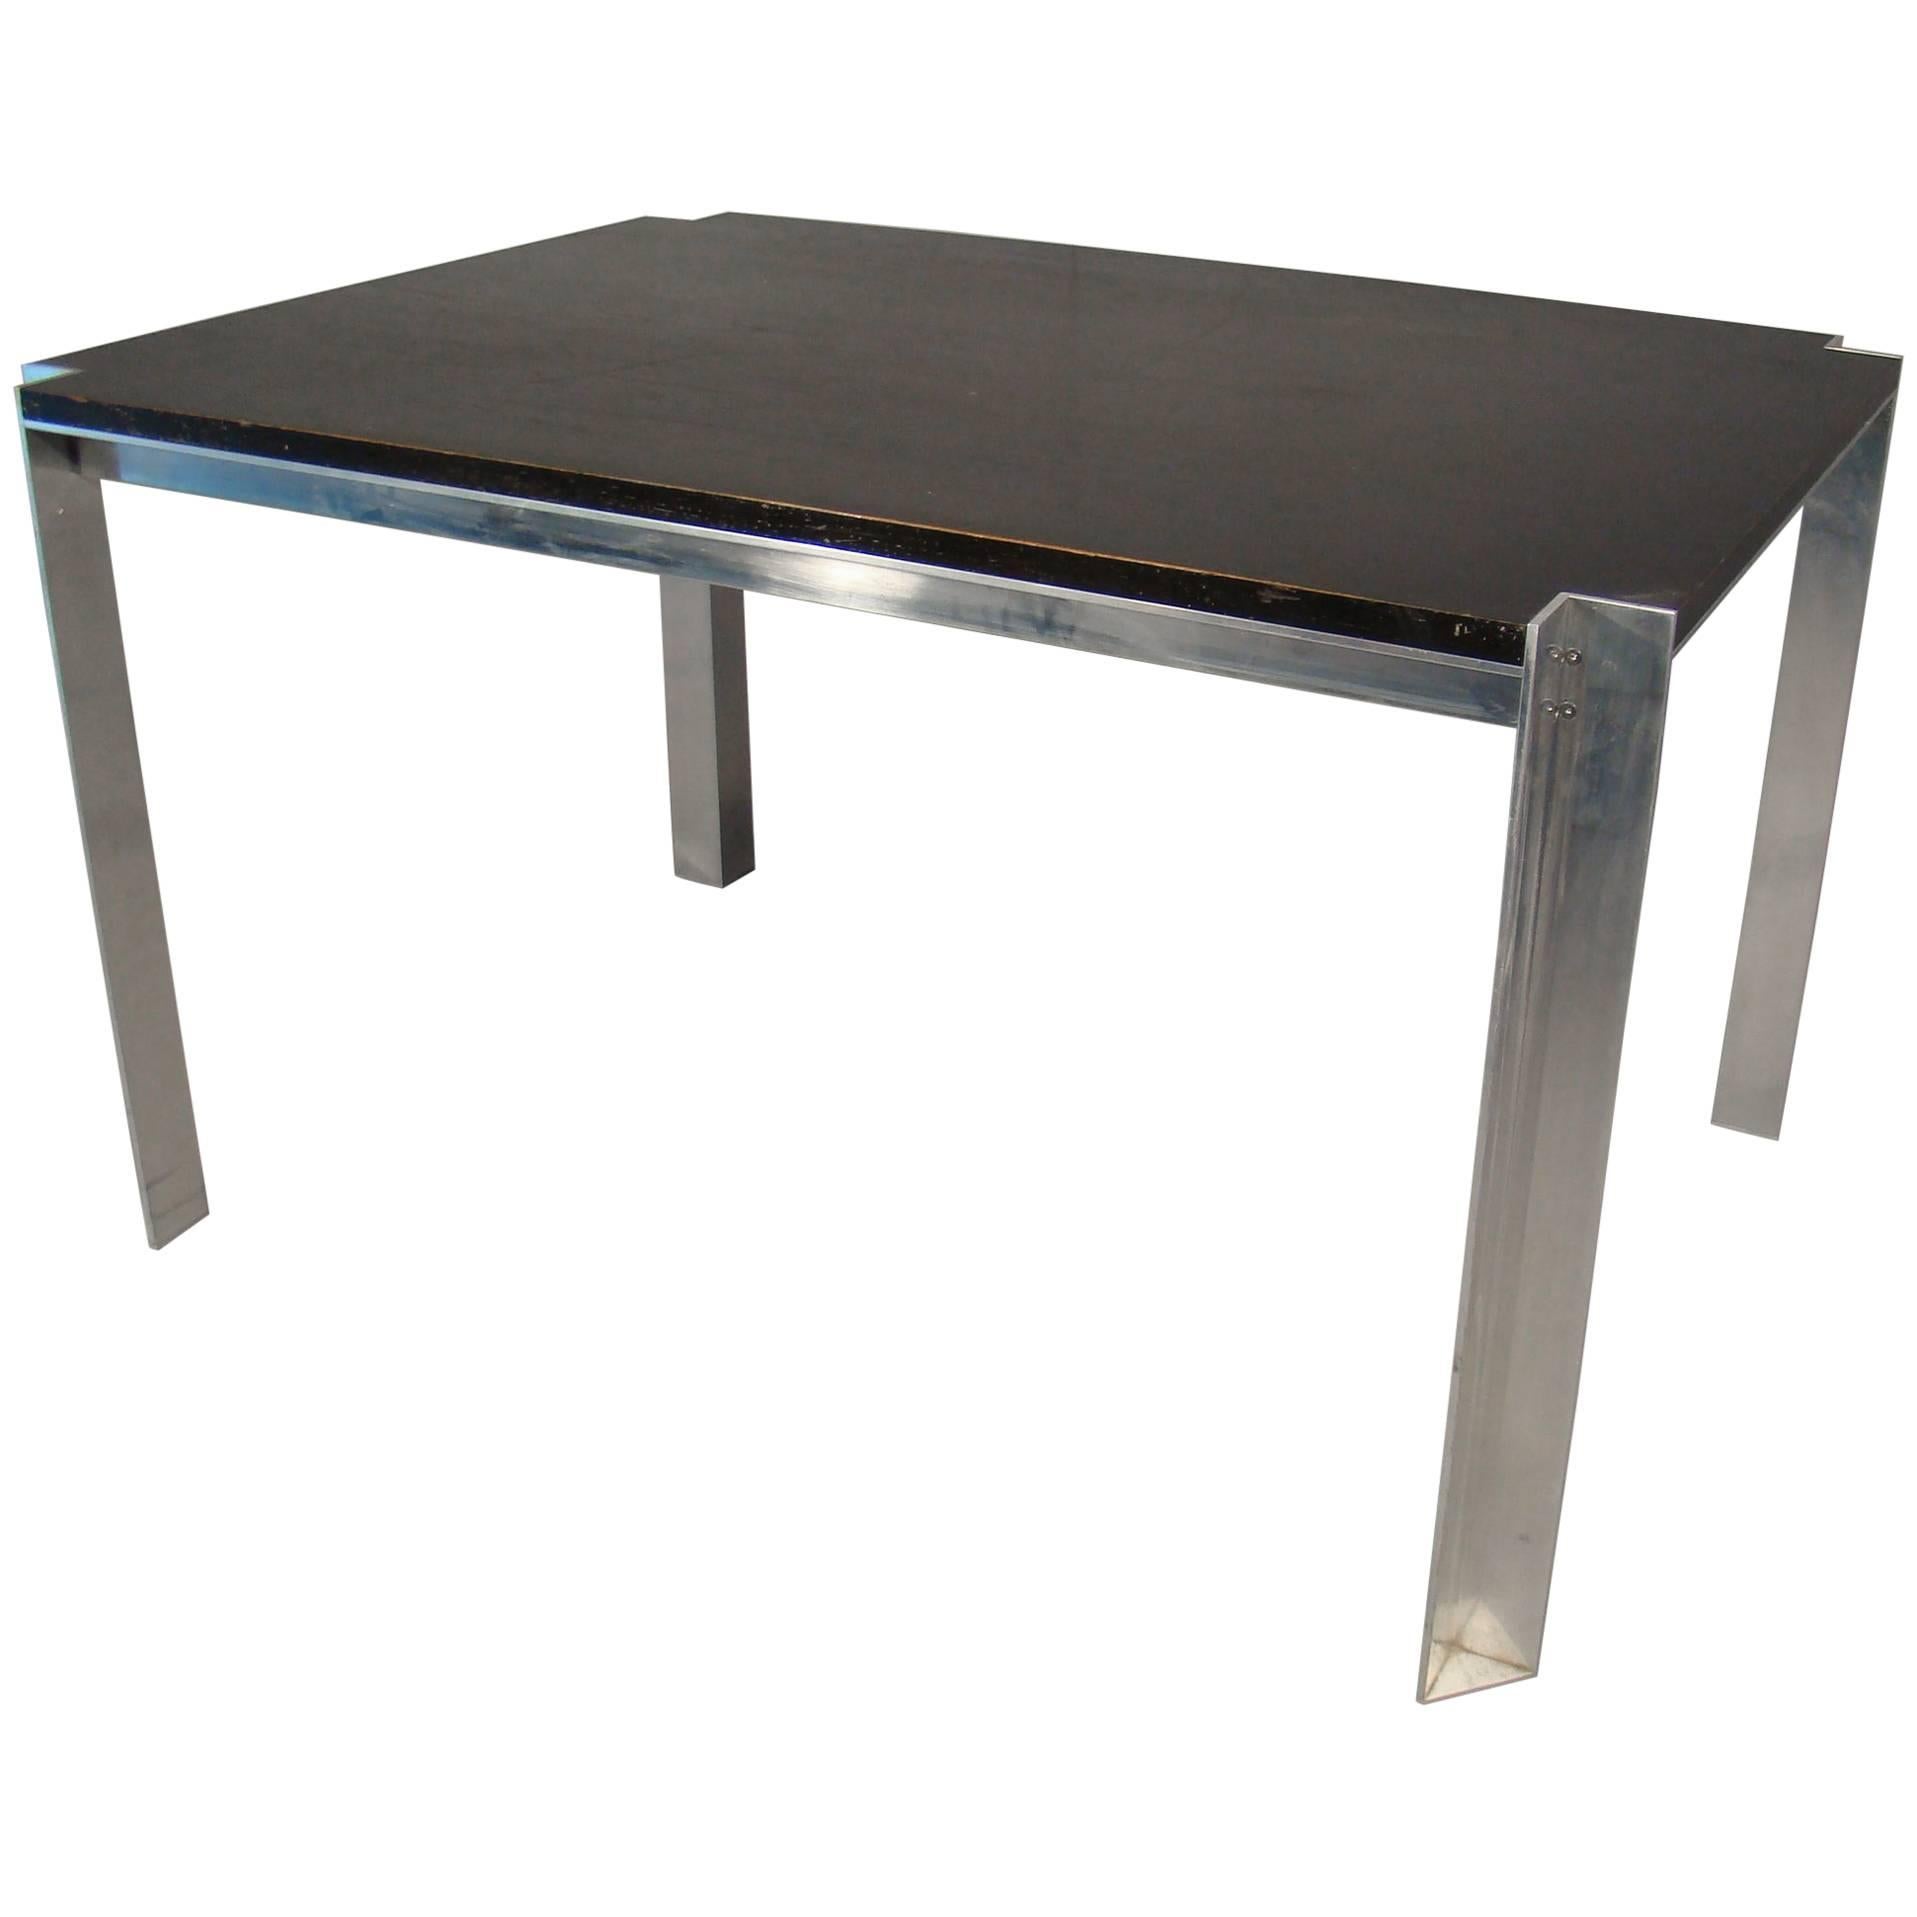 Georges Frydman, Steel Table with Lacquered Wood Top, Edition E.F.A For Sale